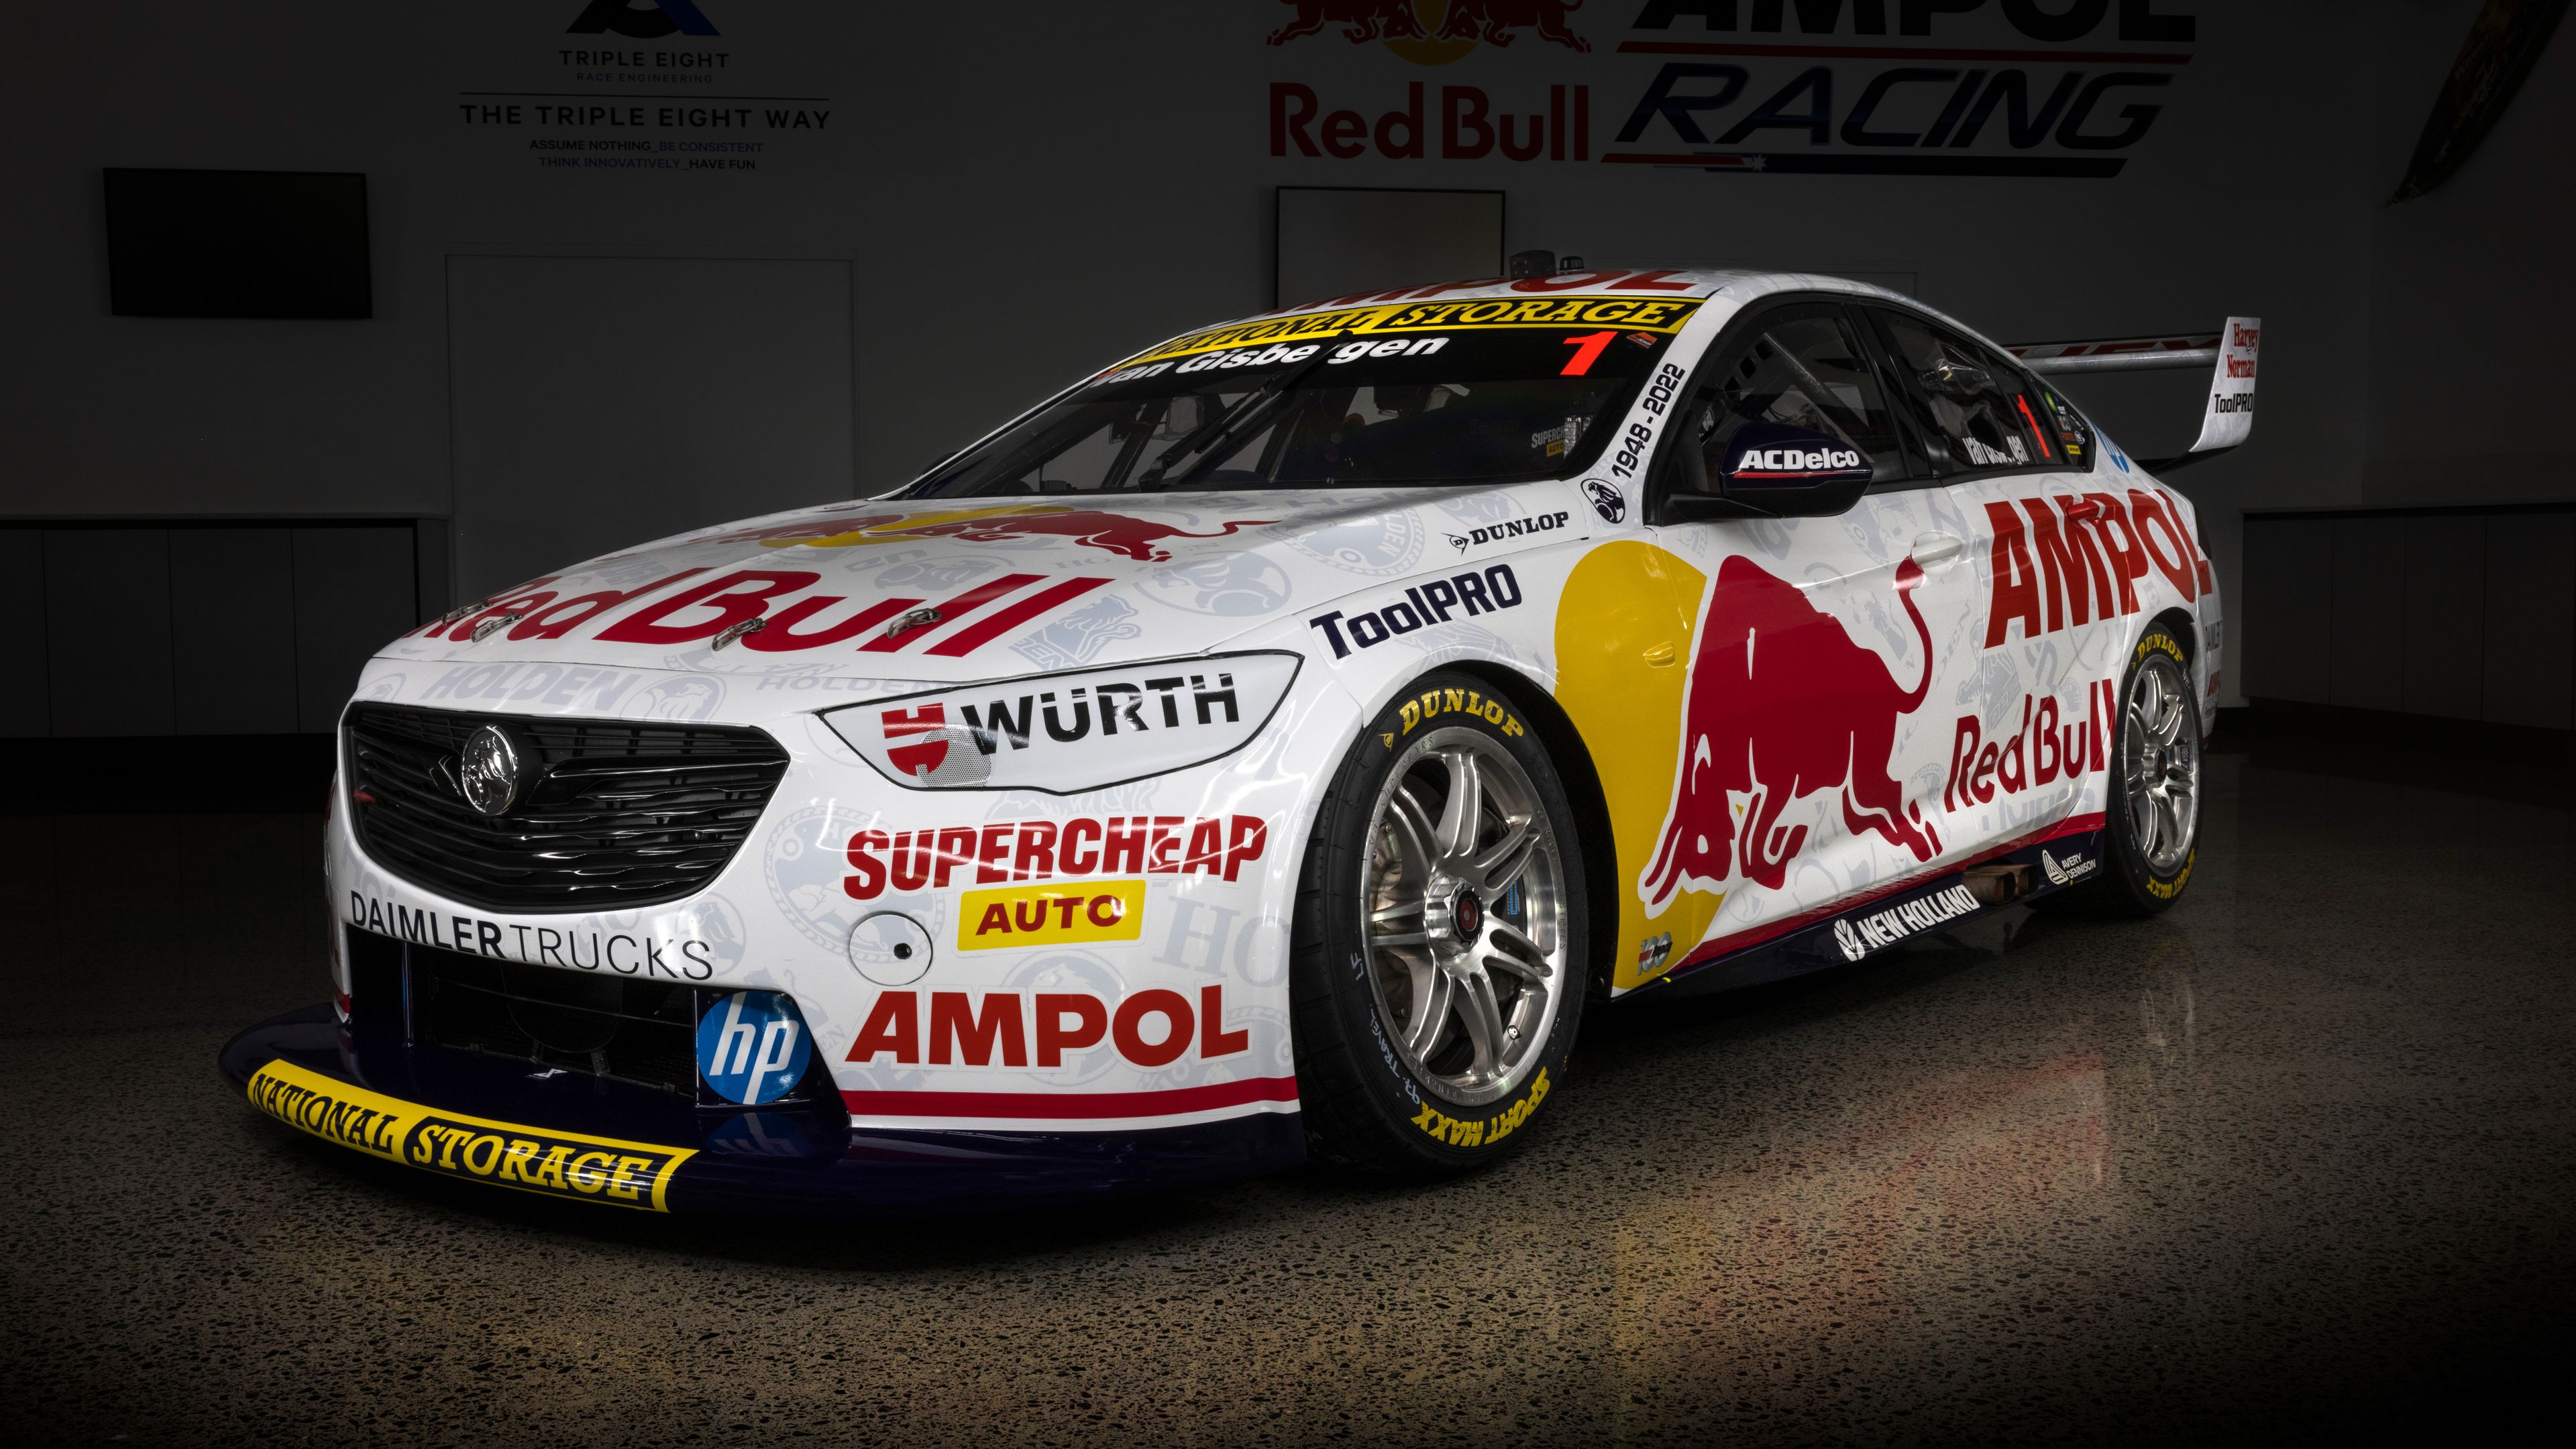 Triple Eight have released the Holden tribute livery they will run at the Adelaide 500 - the final race meeting for Holden in the Supercars championship.